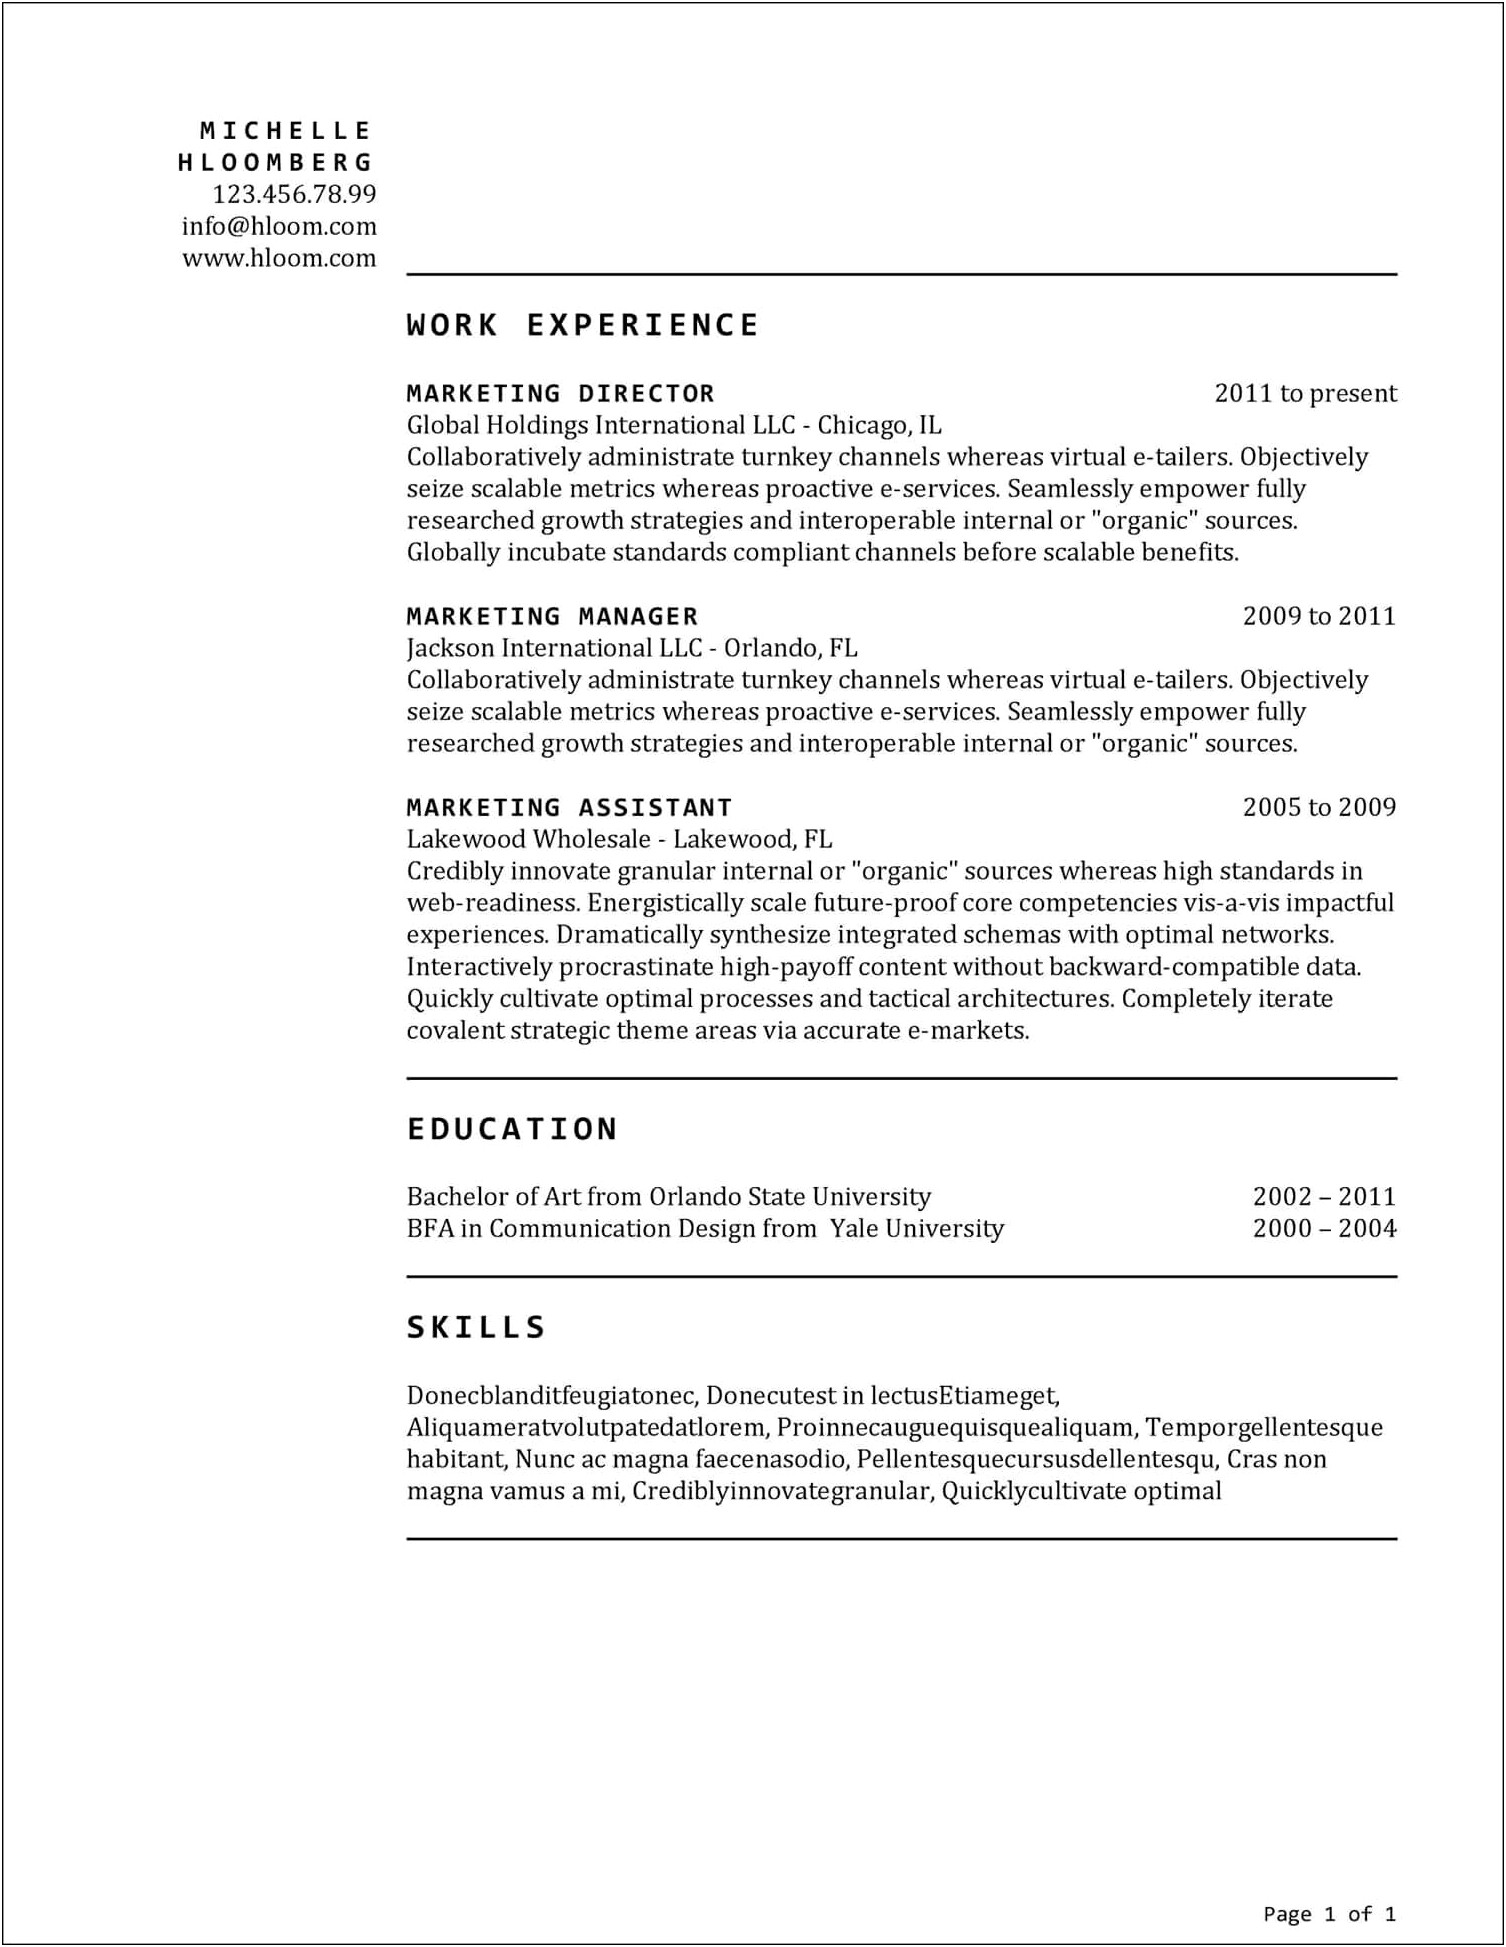 Are Resume Templates Really Free